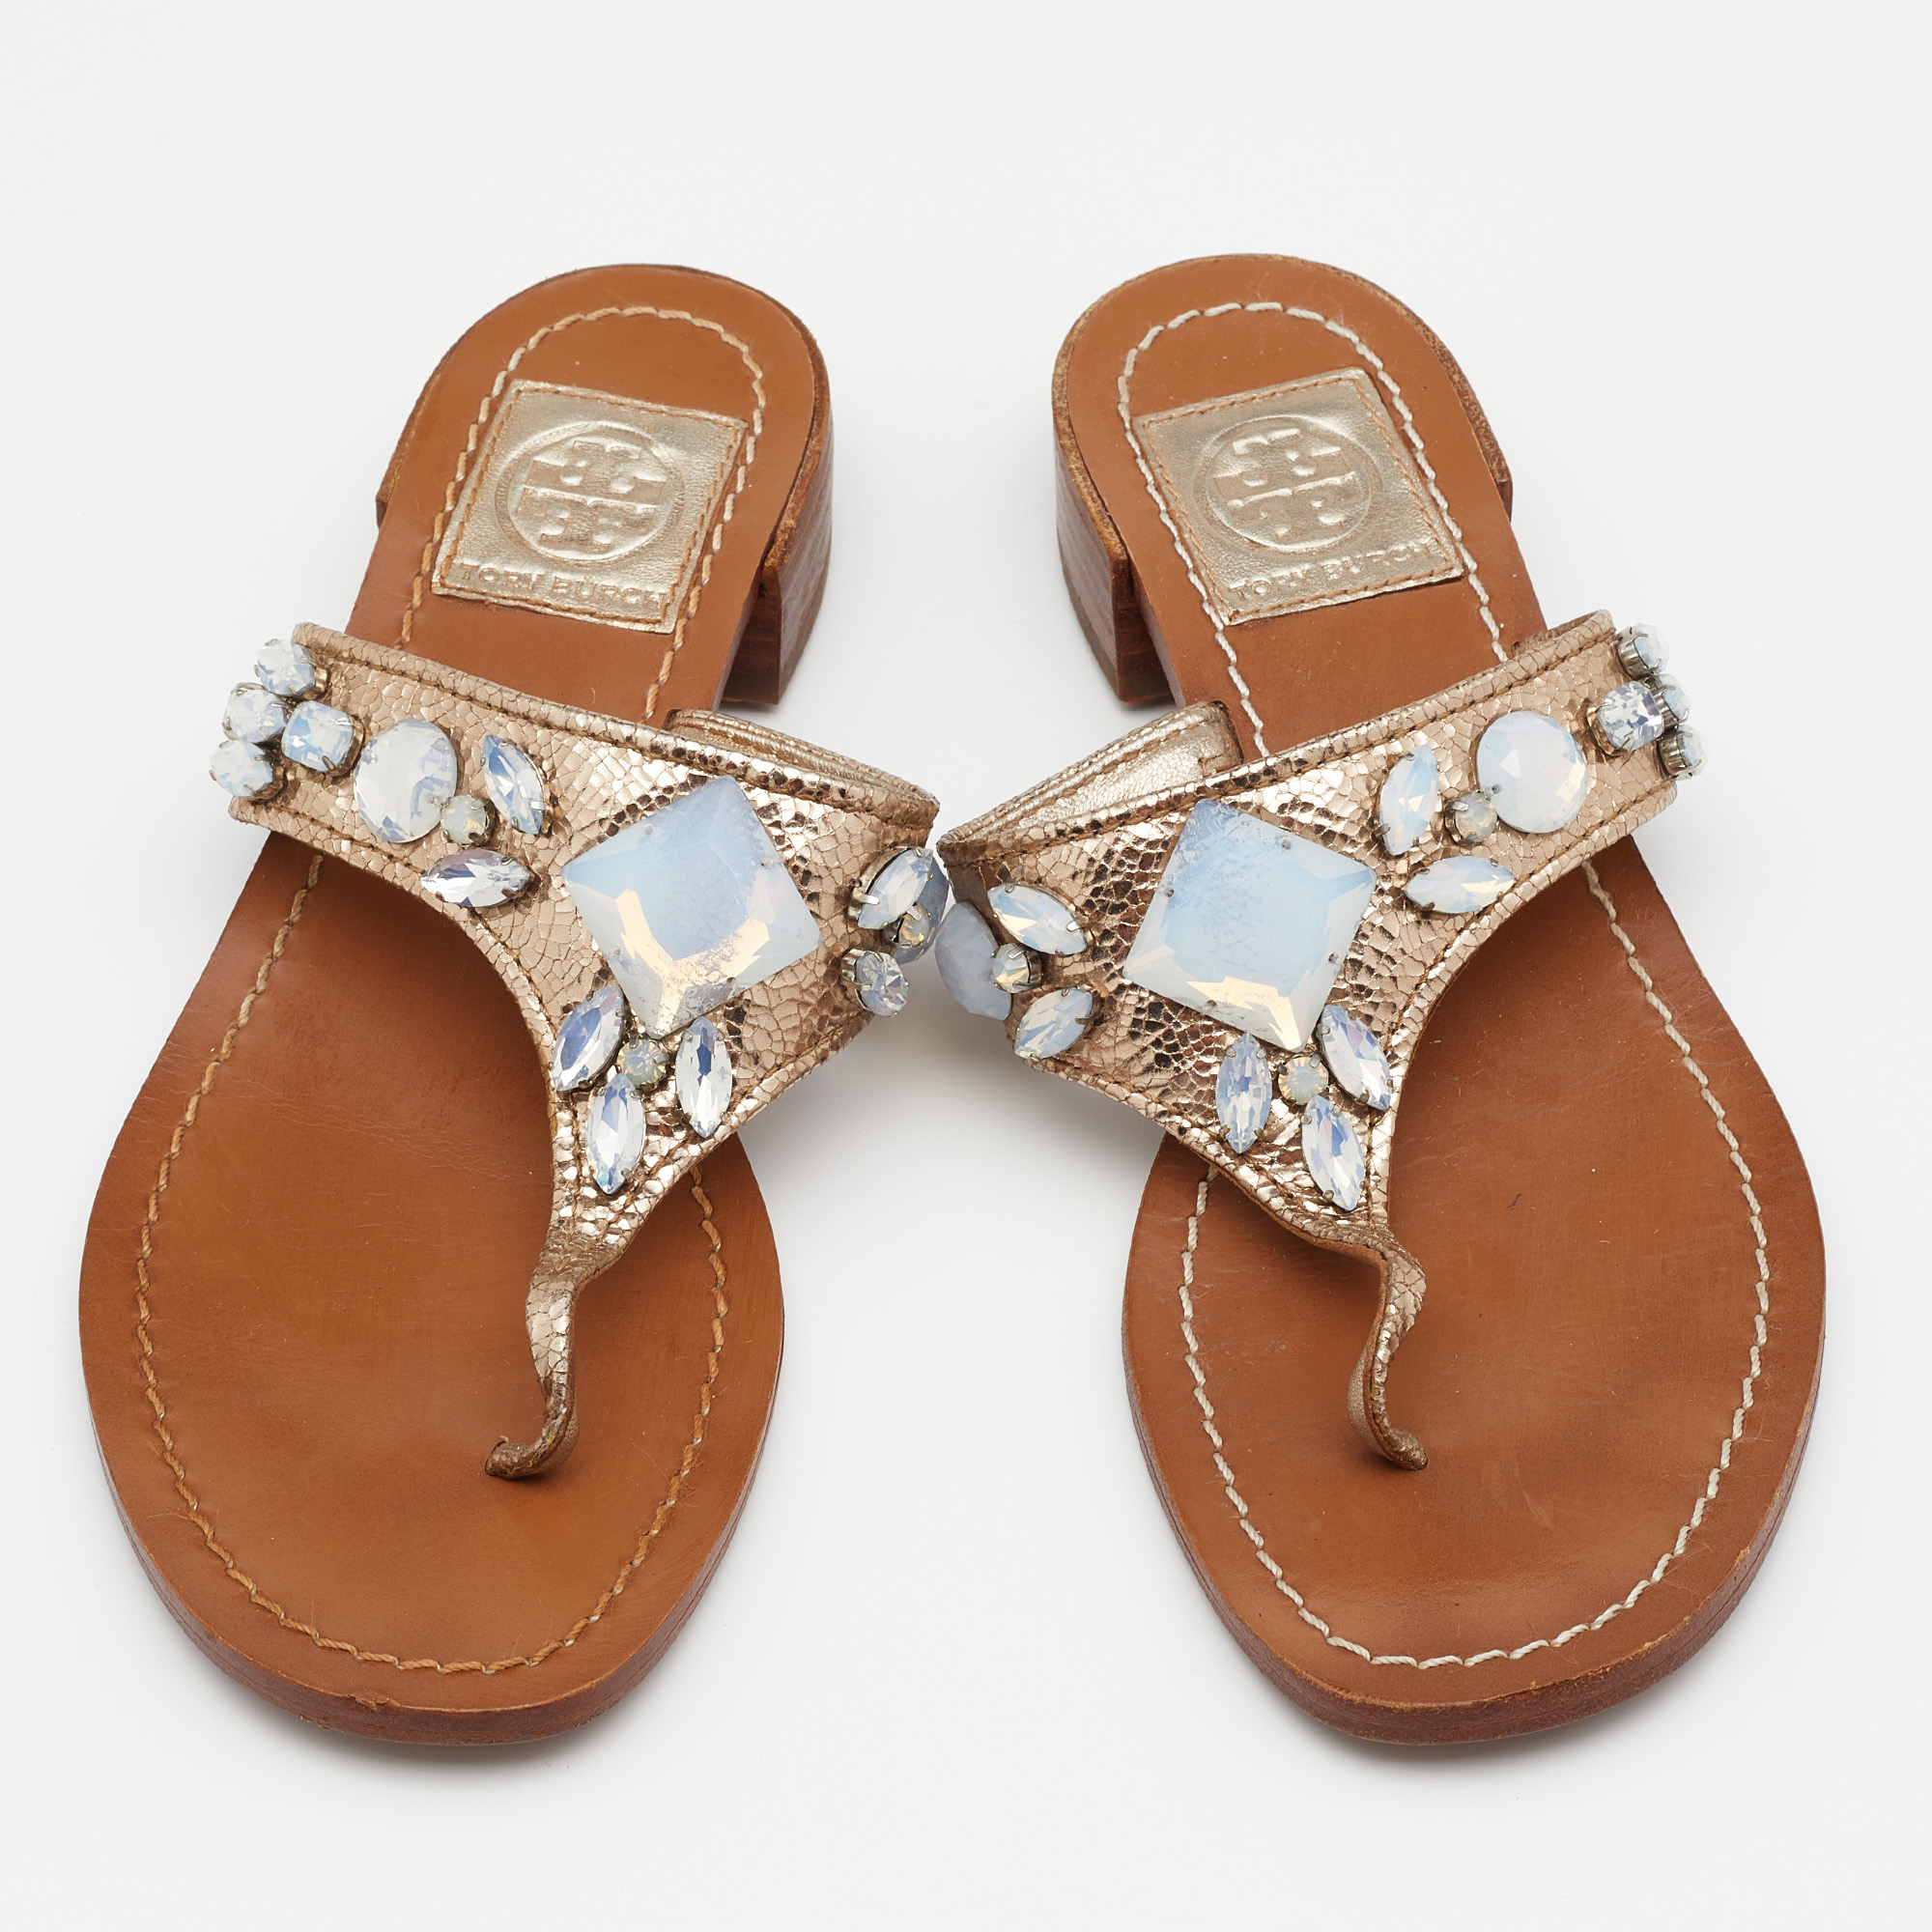 Tory Burch Metallic Crinkled Leather Embellished Thong Flats Size 36.5